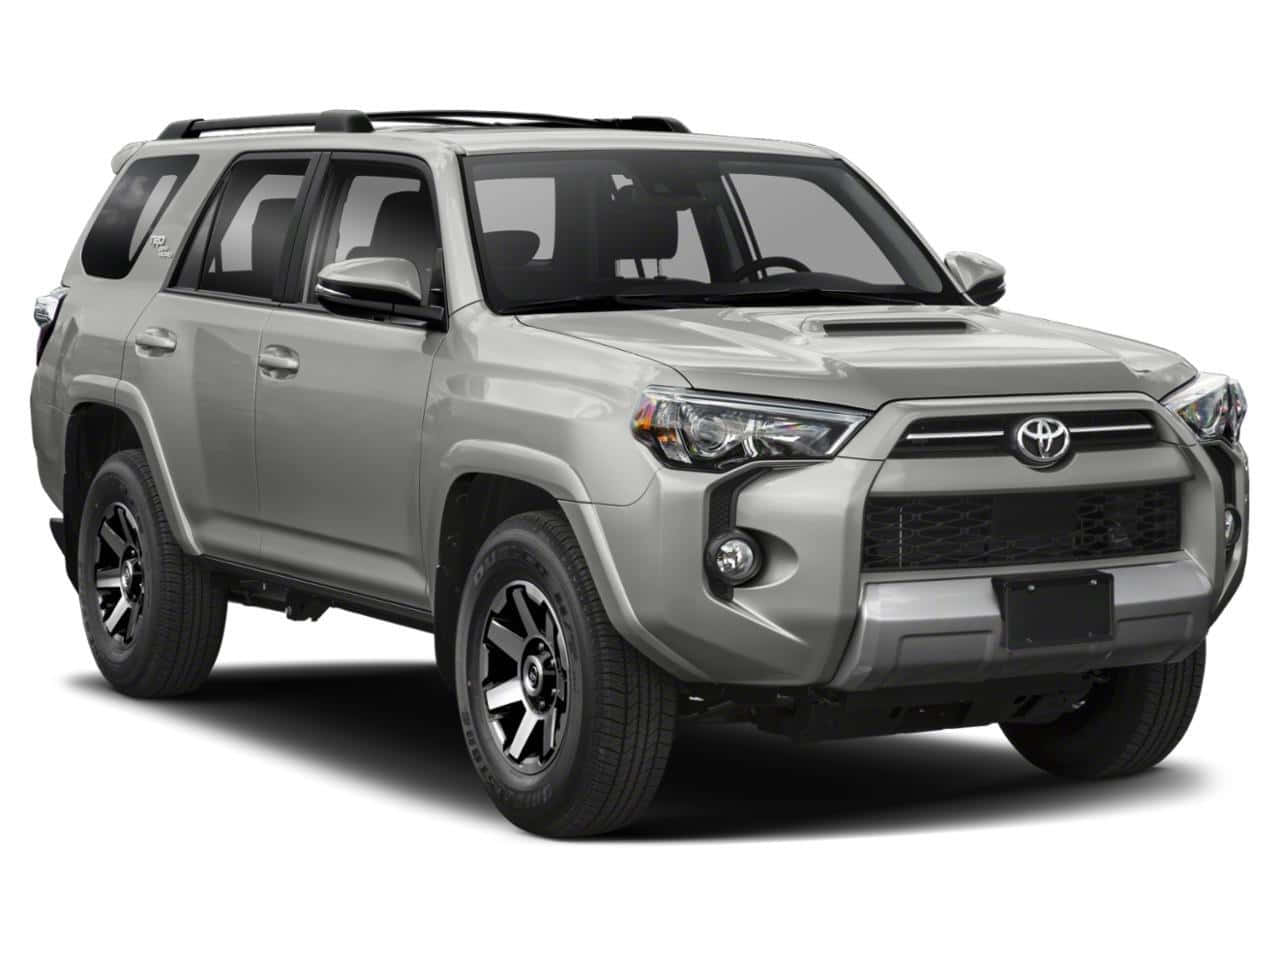 The 2019 Toyota 4runner Is Shown In A Gray Color